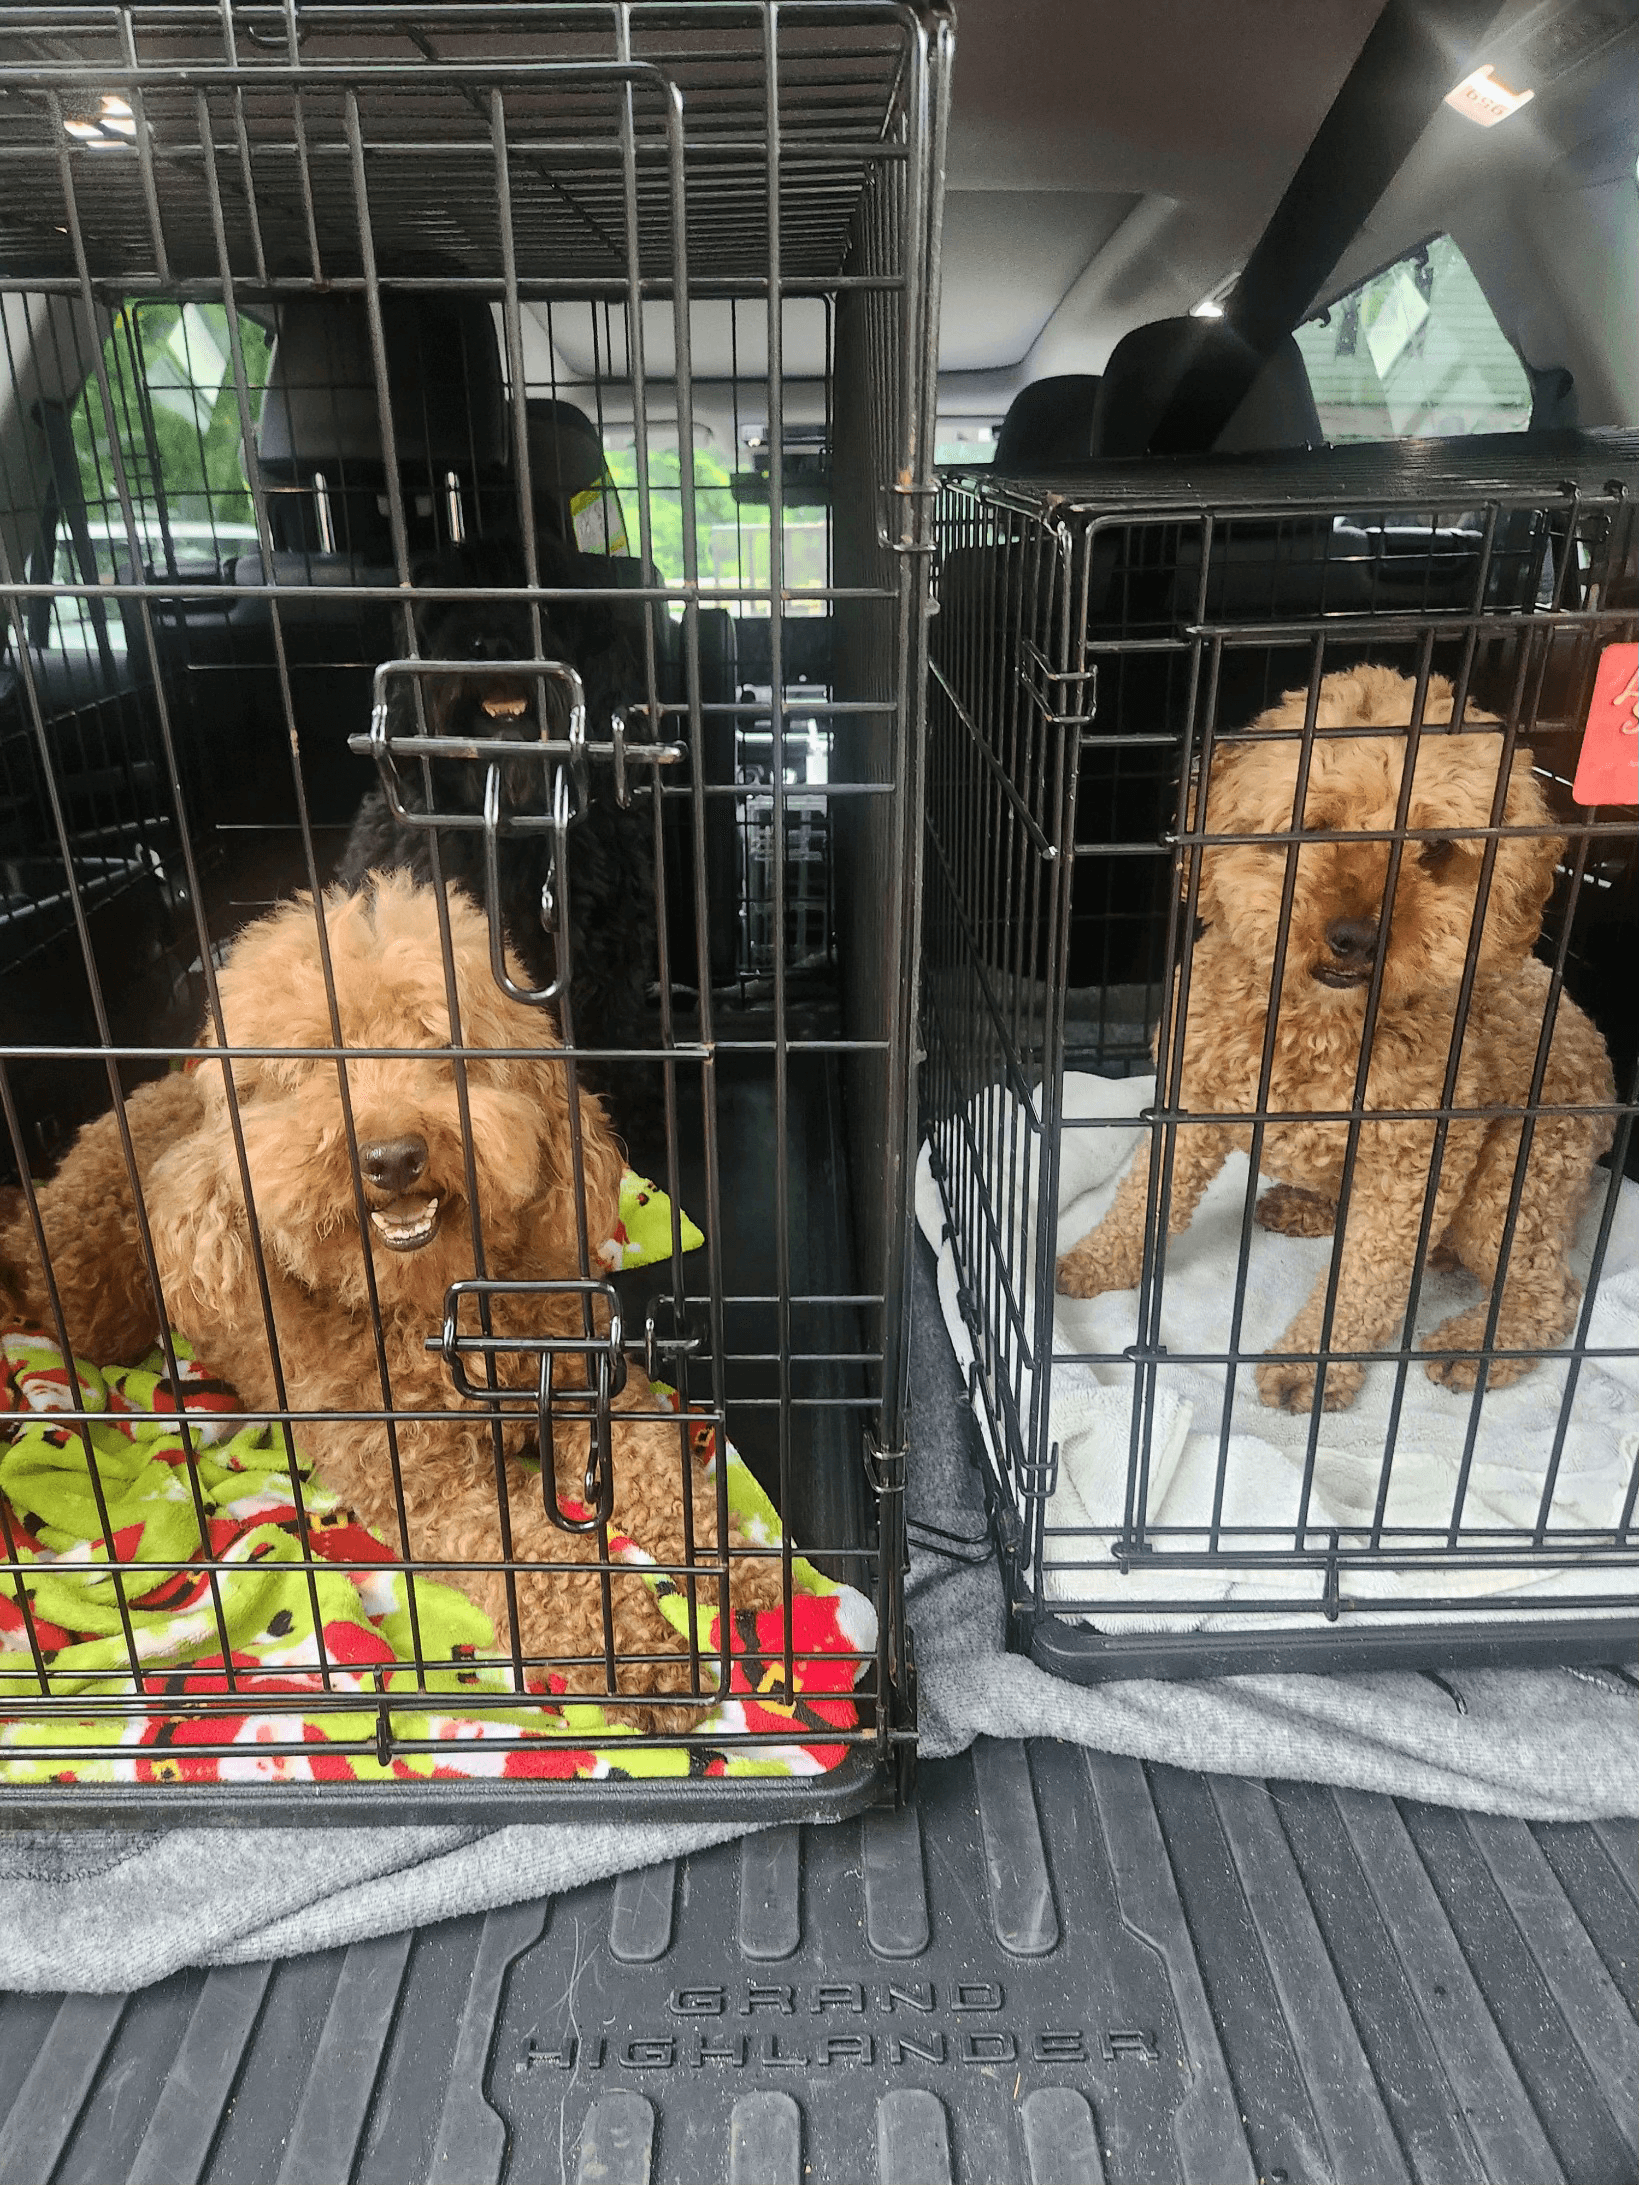 North Jersey rescues save 16 'trembling and terrified' dogs from Blairstown breeder (NorthJersey.com)